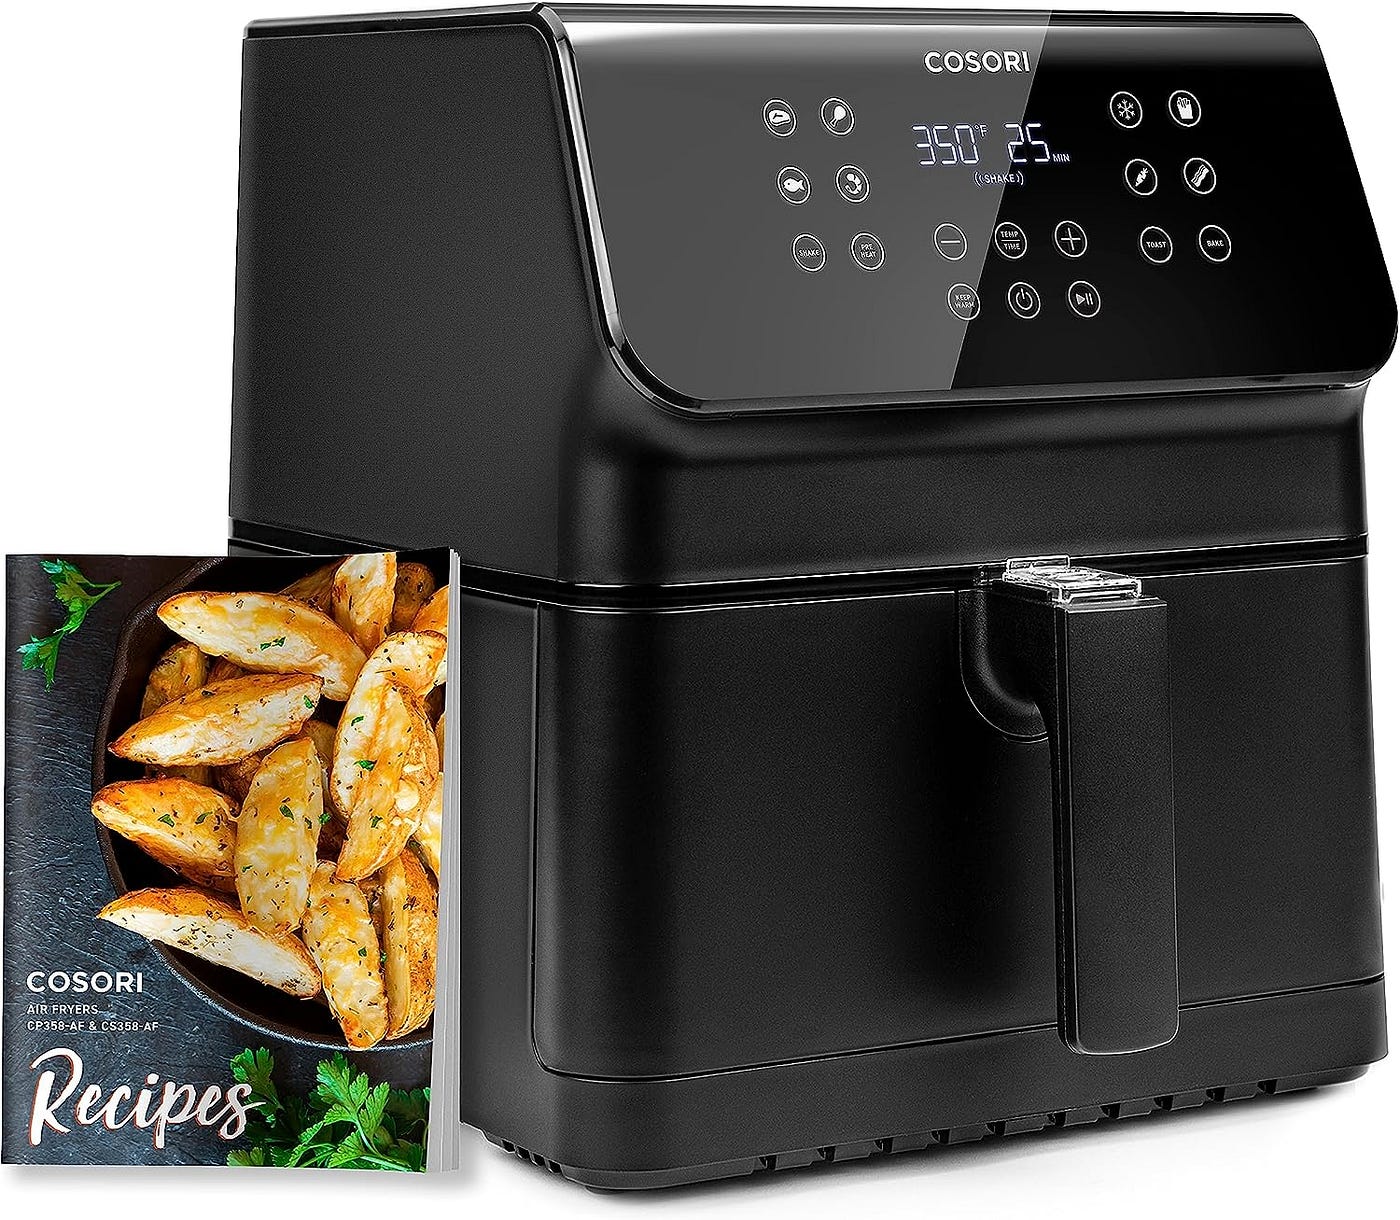 Dash AirCrisp Pro Electric Air Fryer Oven Cooker with Digital Display